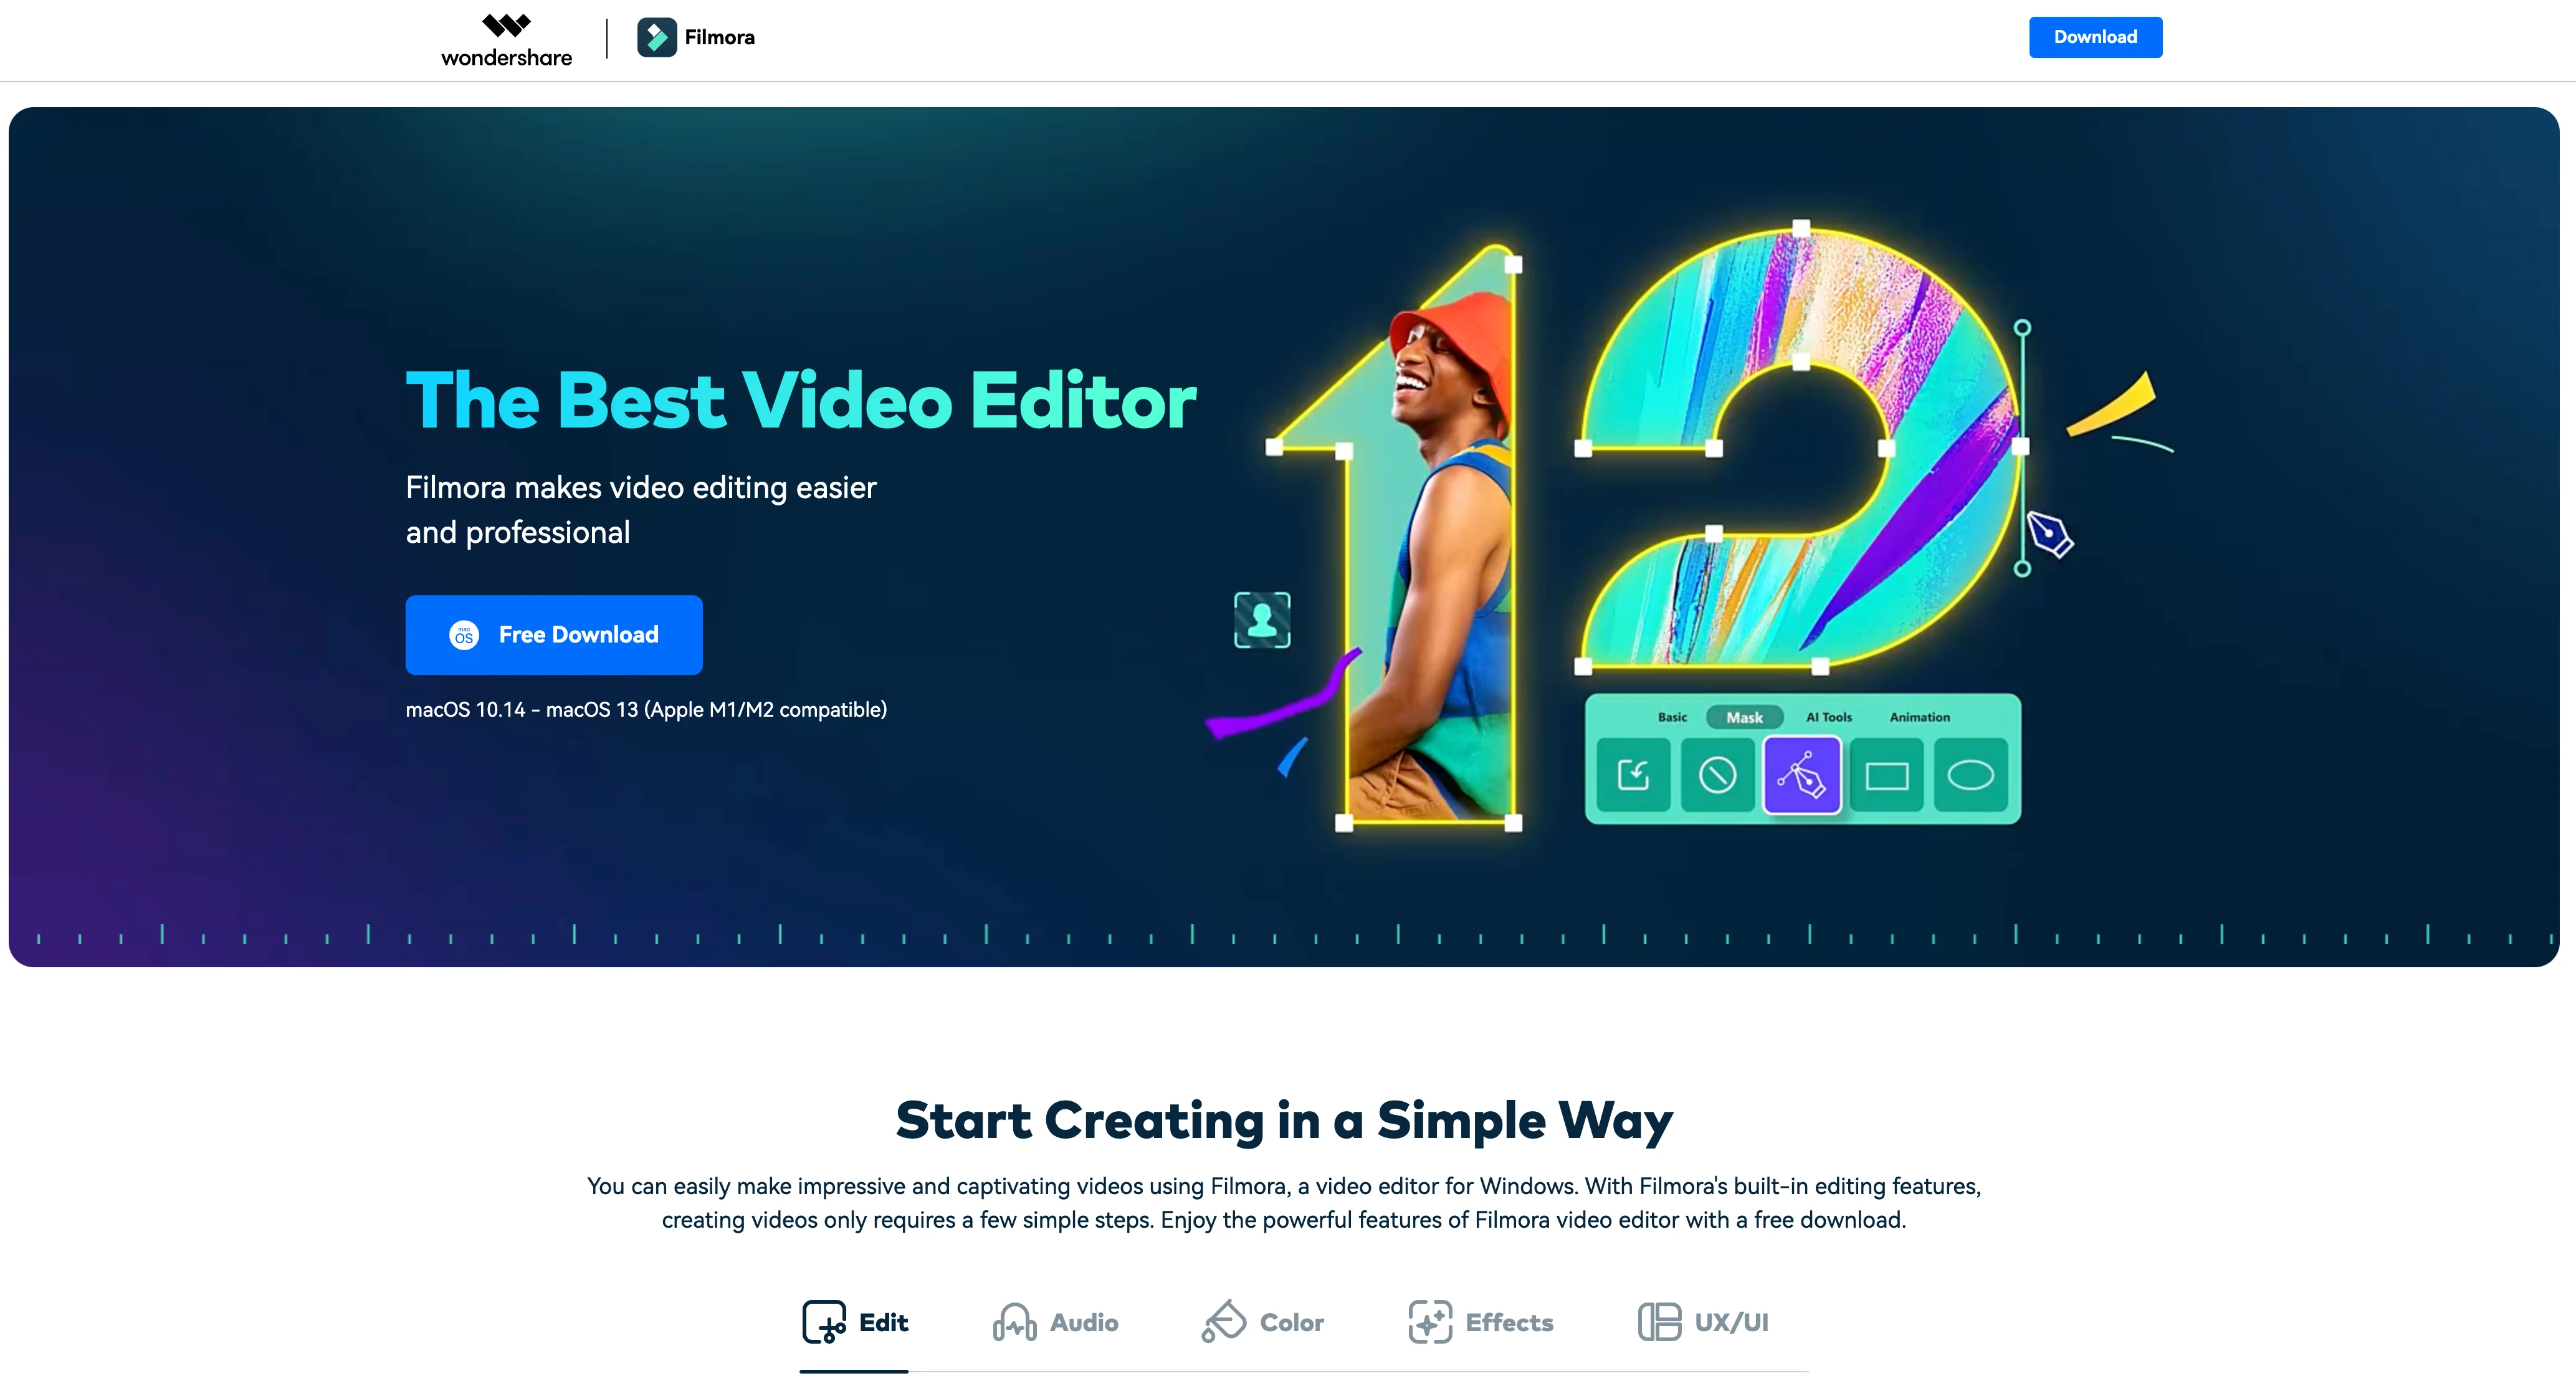 FIlmora Landing Page: One of the best video editors for YouTube Shorts in 2023